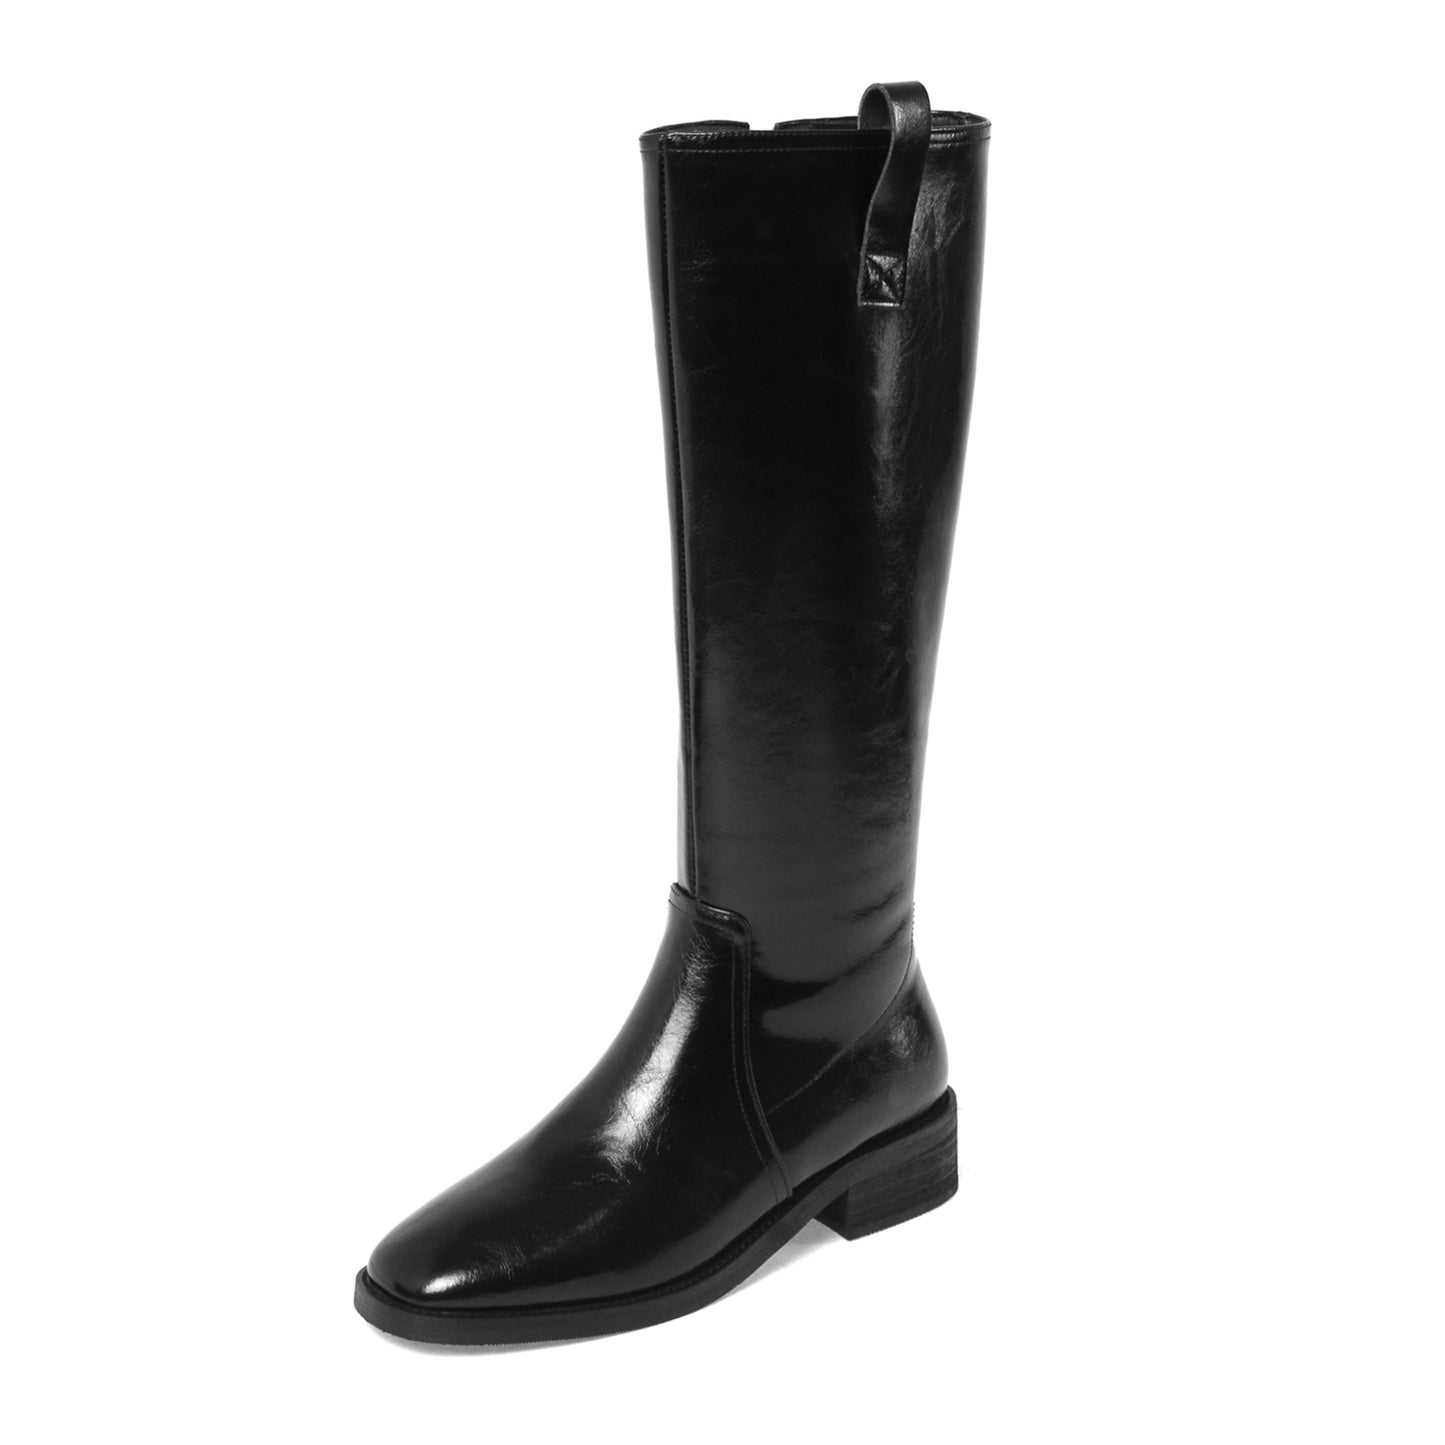 TinaCus Women's Handmade Genuine Leather Round Toe Low Block Heel Side Zip Up Western Style Knee High Riding Boots